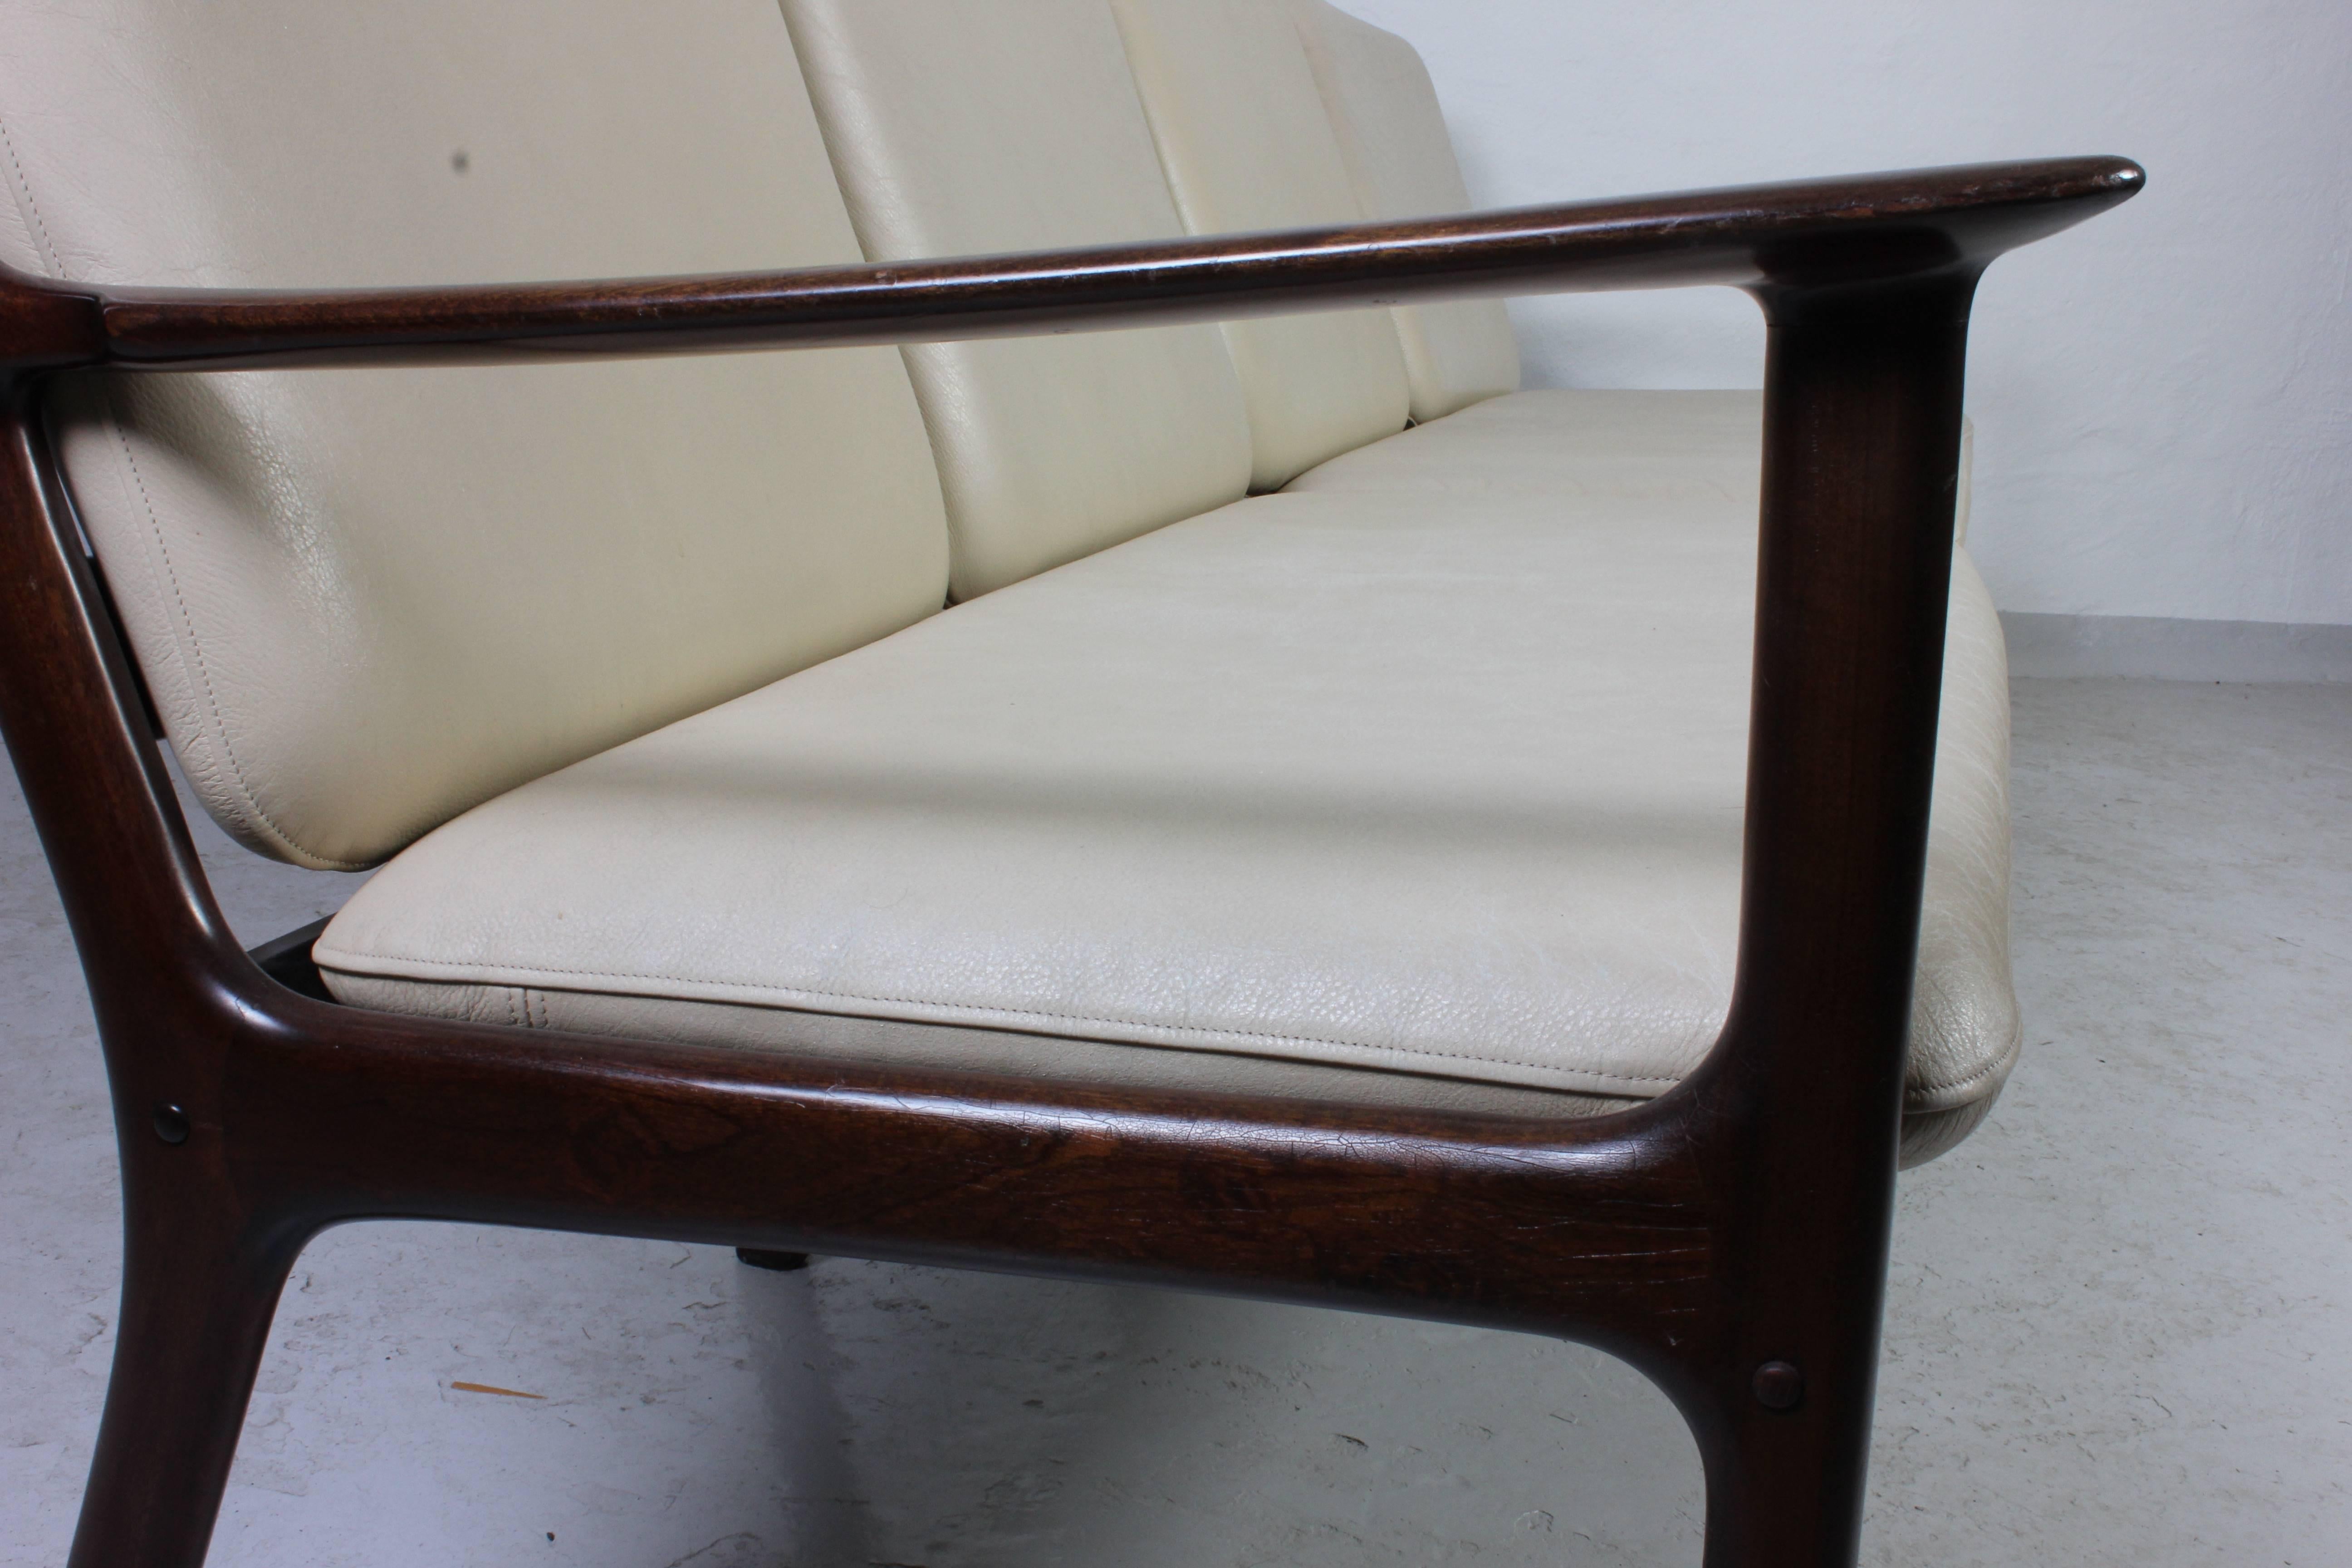 Mid-20th Century Ole Wanscher Mahogany PJ112 Four-Seat Sofa and Lounge Chair for Poul Jeppesen